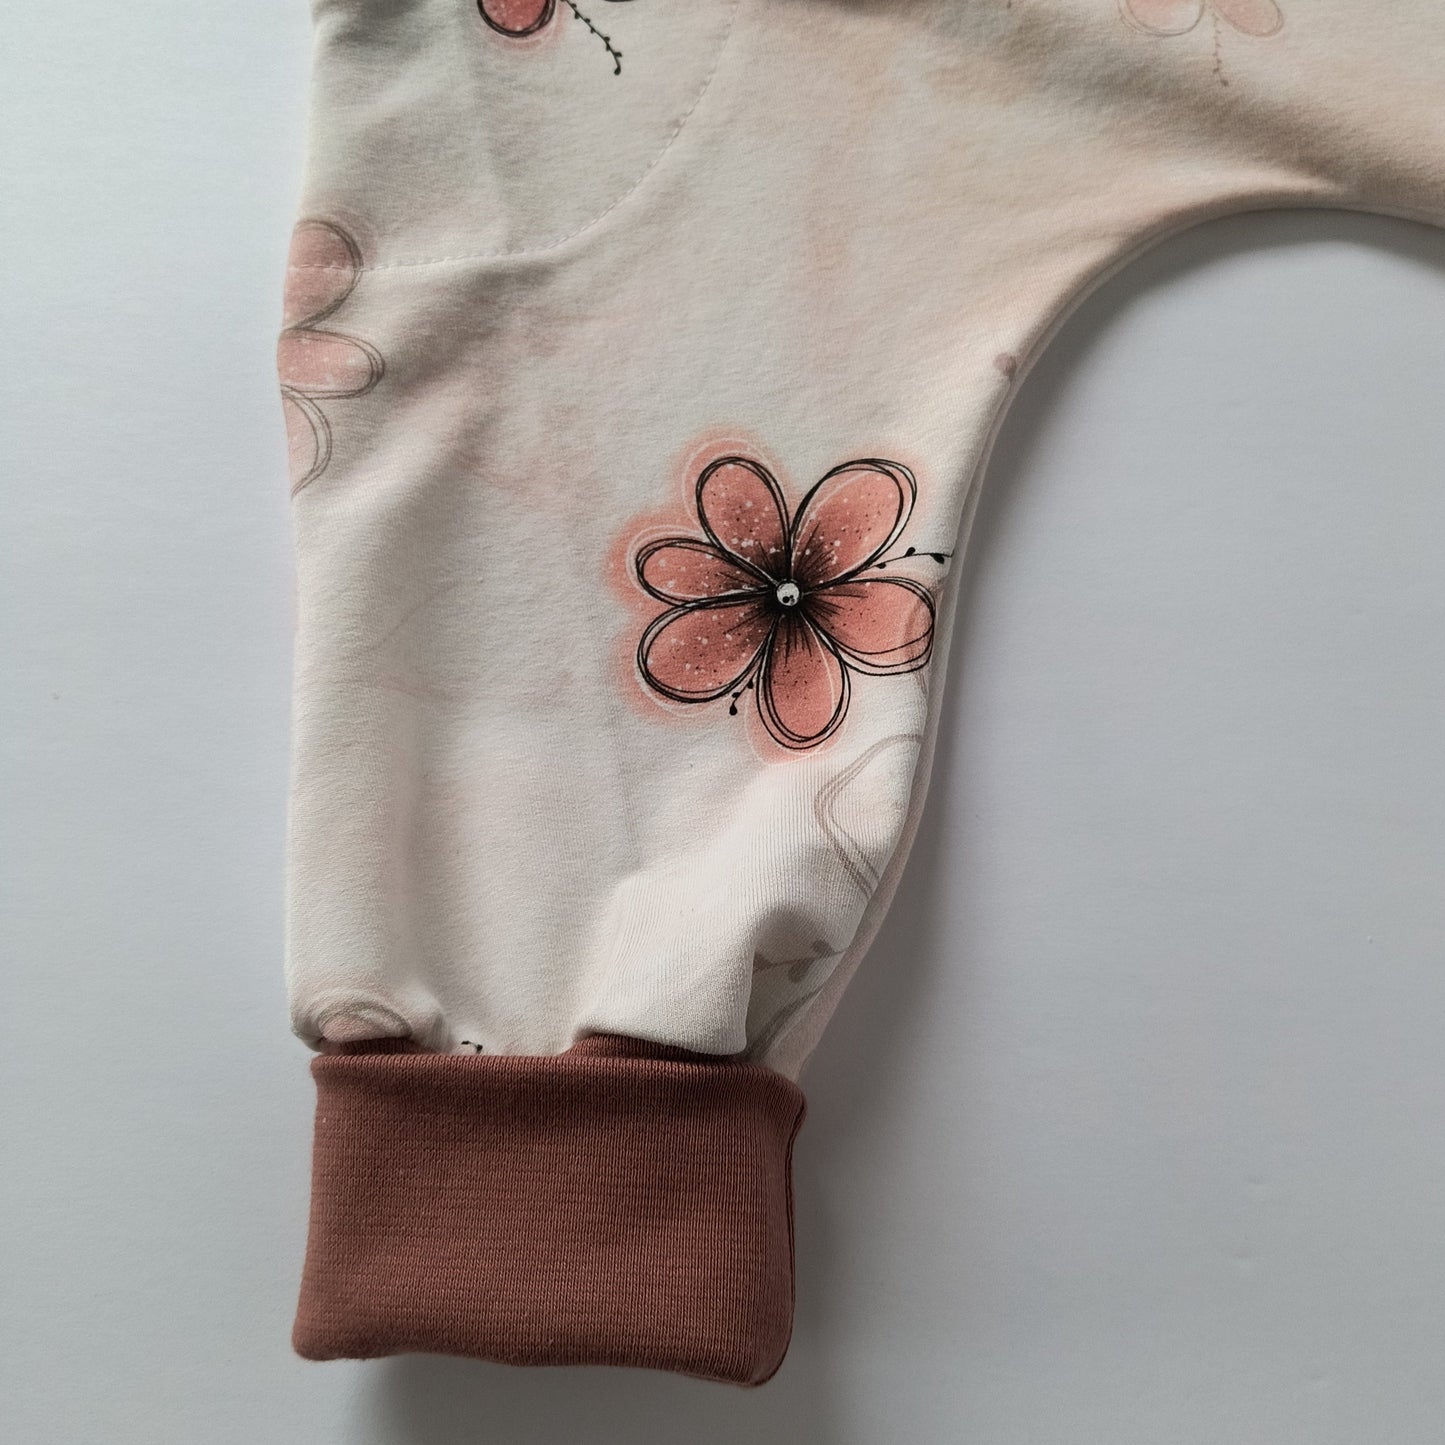 Toddler sweat pants "grow with me", dream flowers, size EUR 92-98 cm / US 18-36 months (Handmade in Canada)